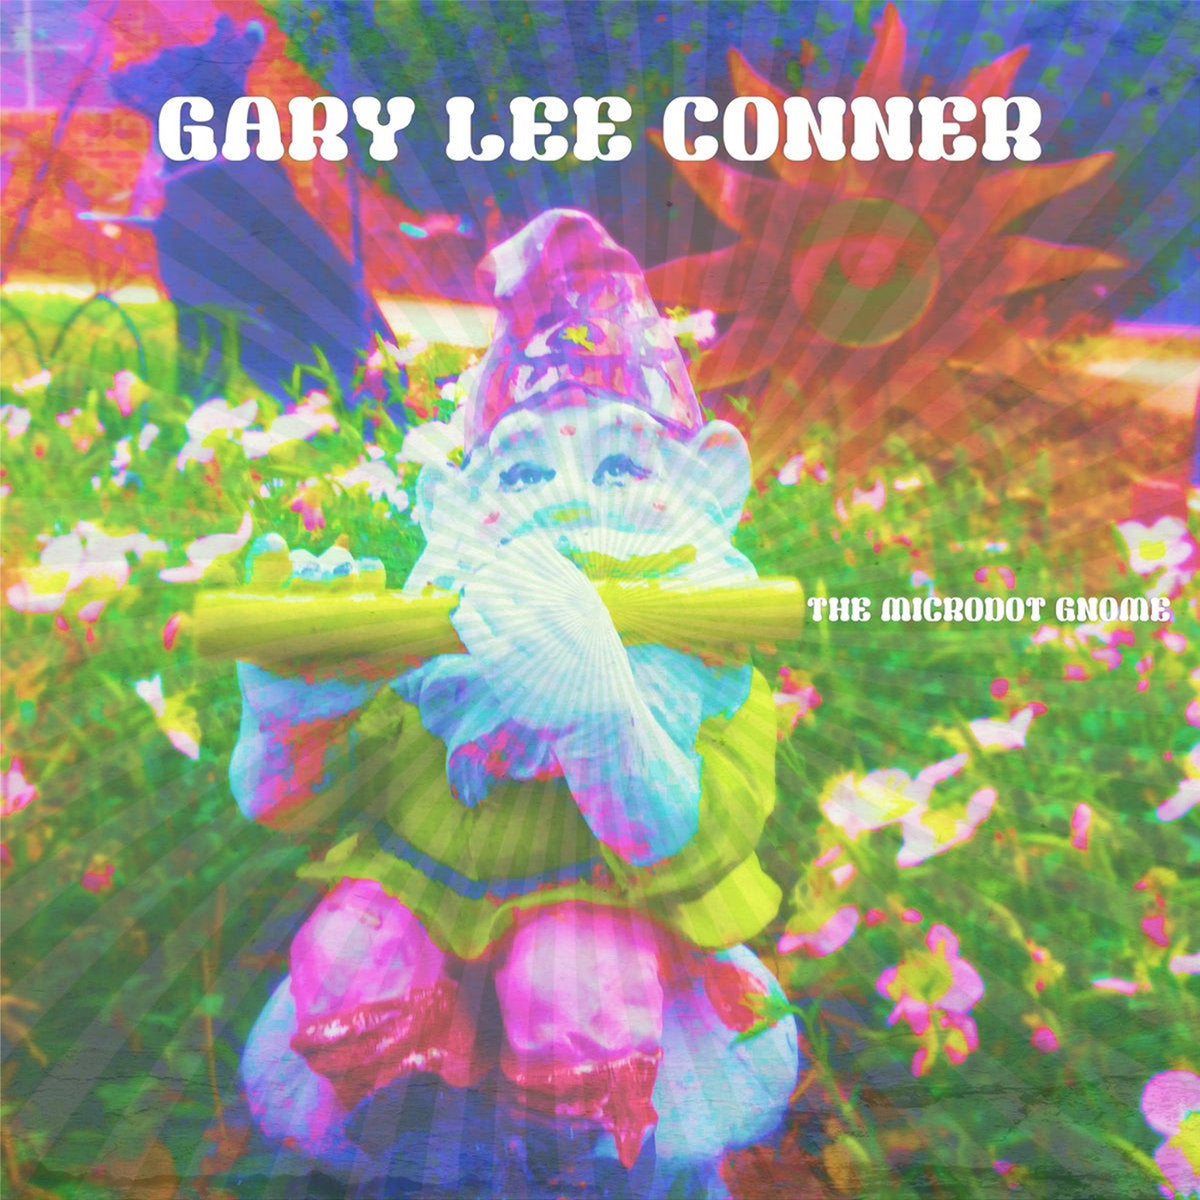 GARY LEE CONNER - "The Microdot Gnome" Compact Disc